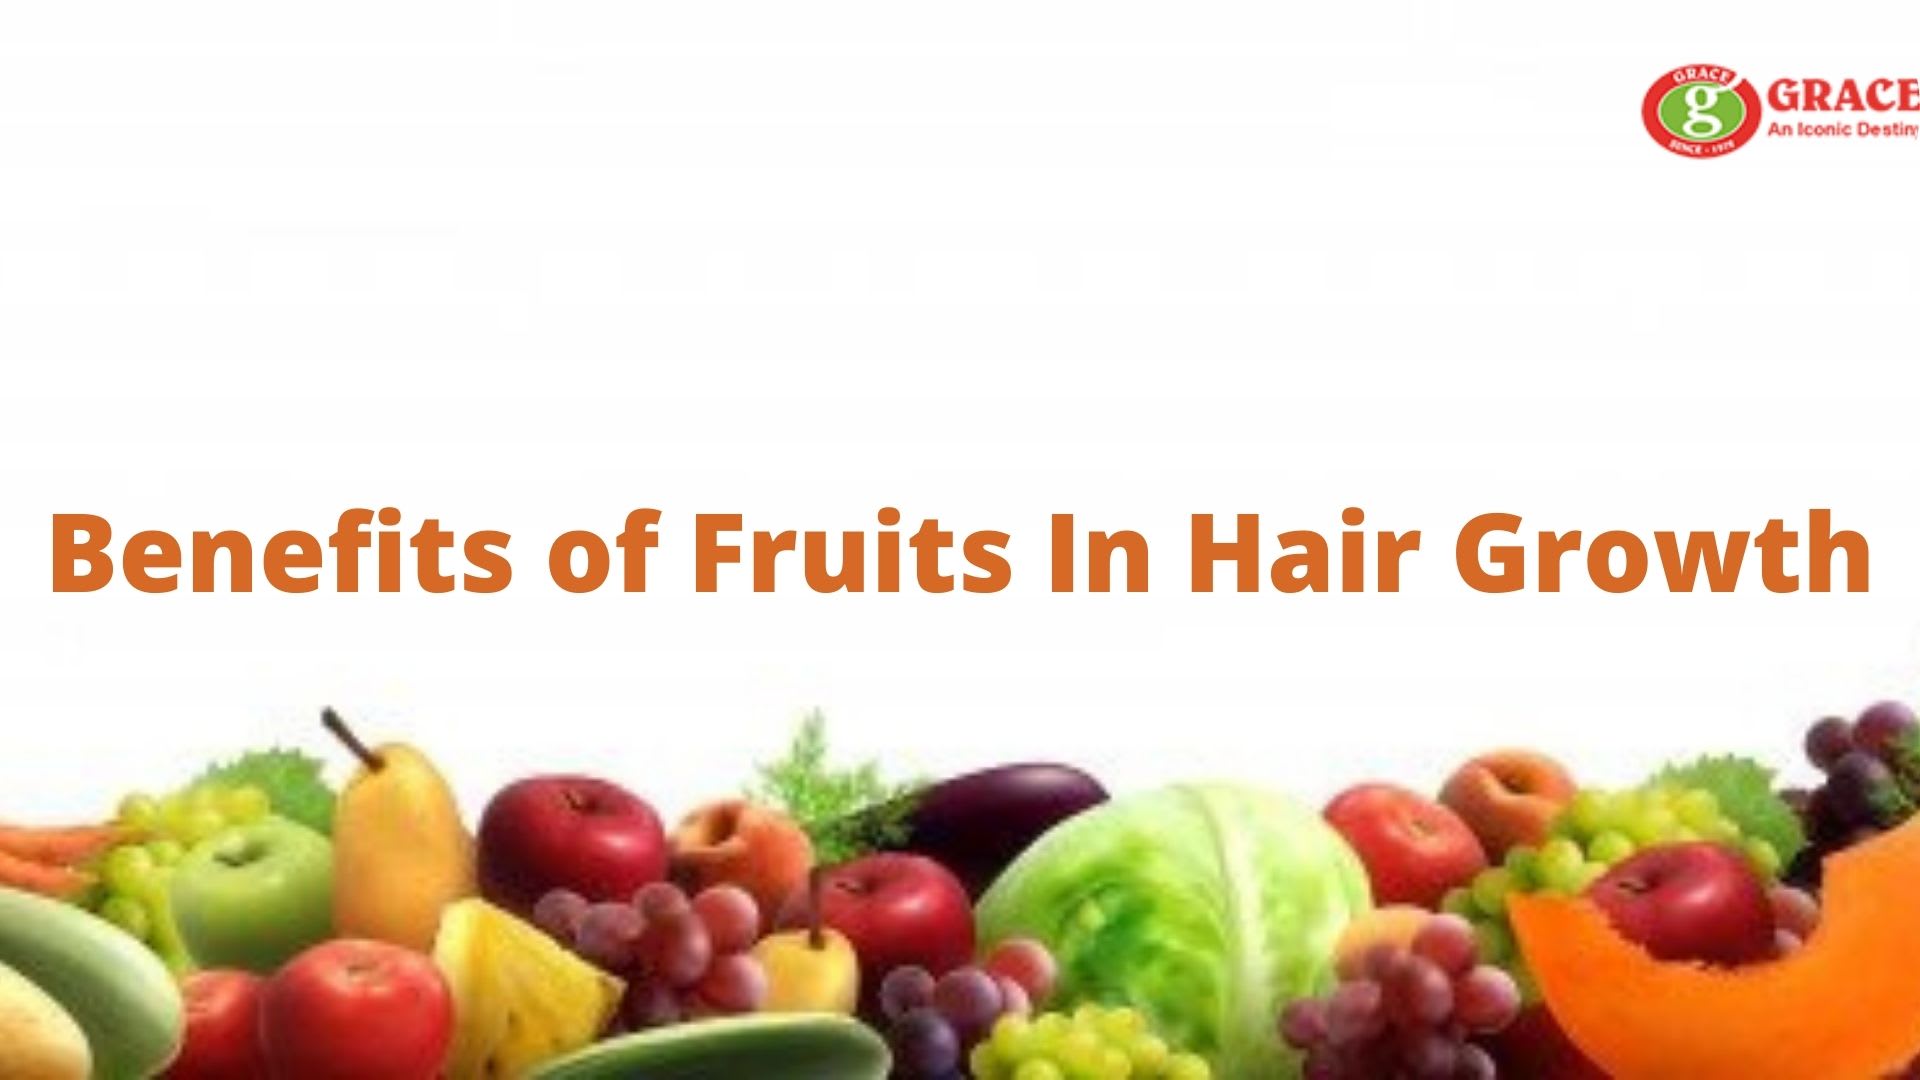 Hair Growth Foods The right food for hair growth is one of the most  amazing hair growth tips ever  Hair growth foods Hair food Healthy hair